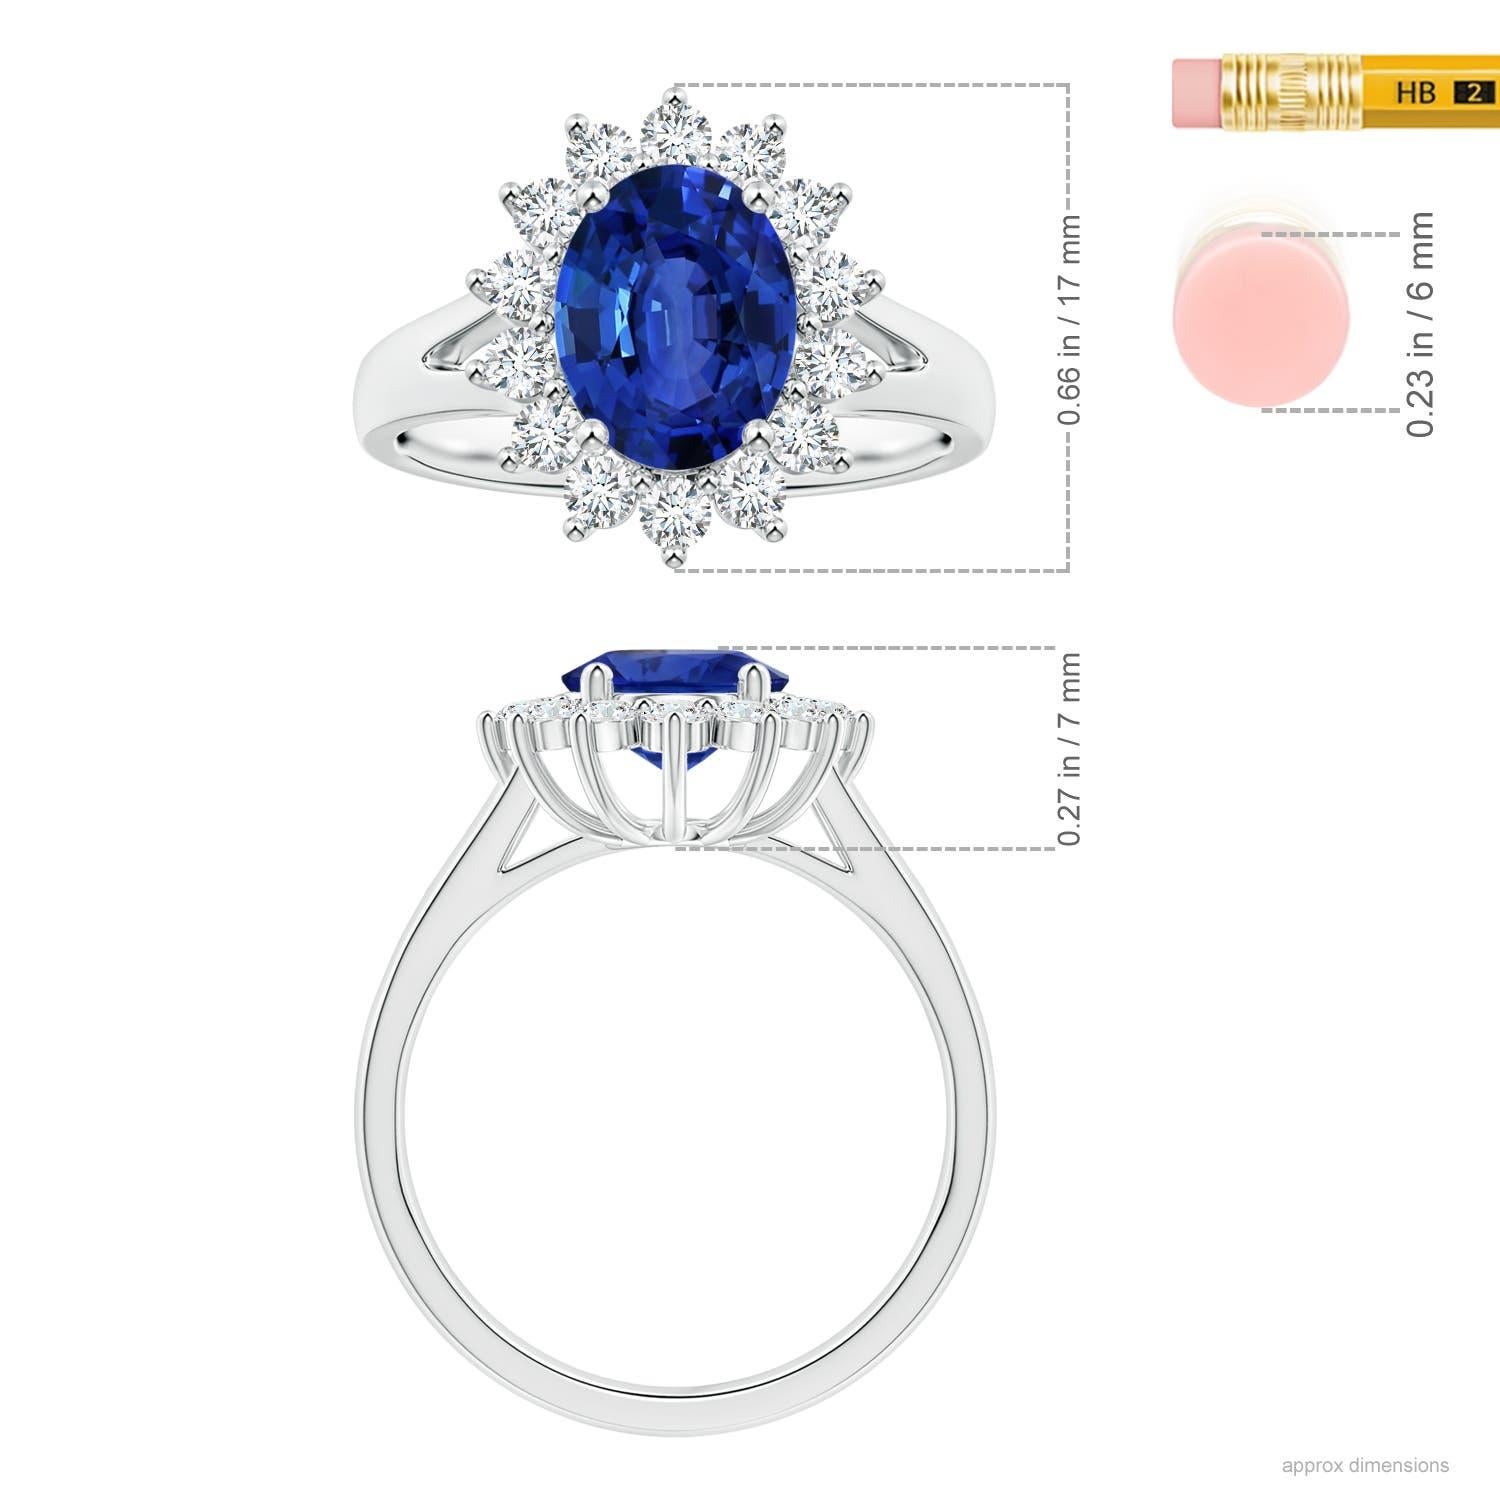 ANGARA Princess Diana Inspired GIA Certified Sapphire Halo Ring in White Gold  4